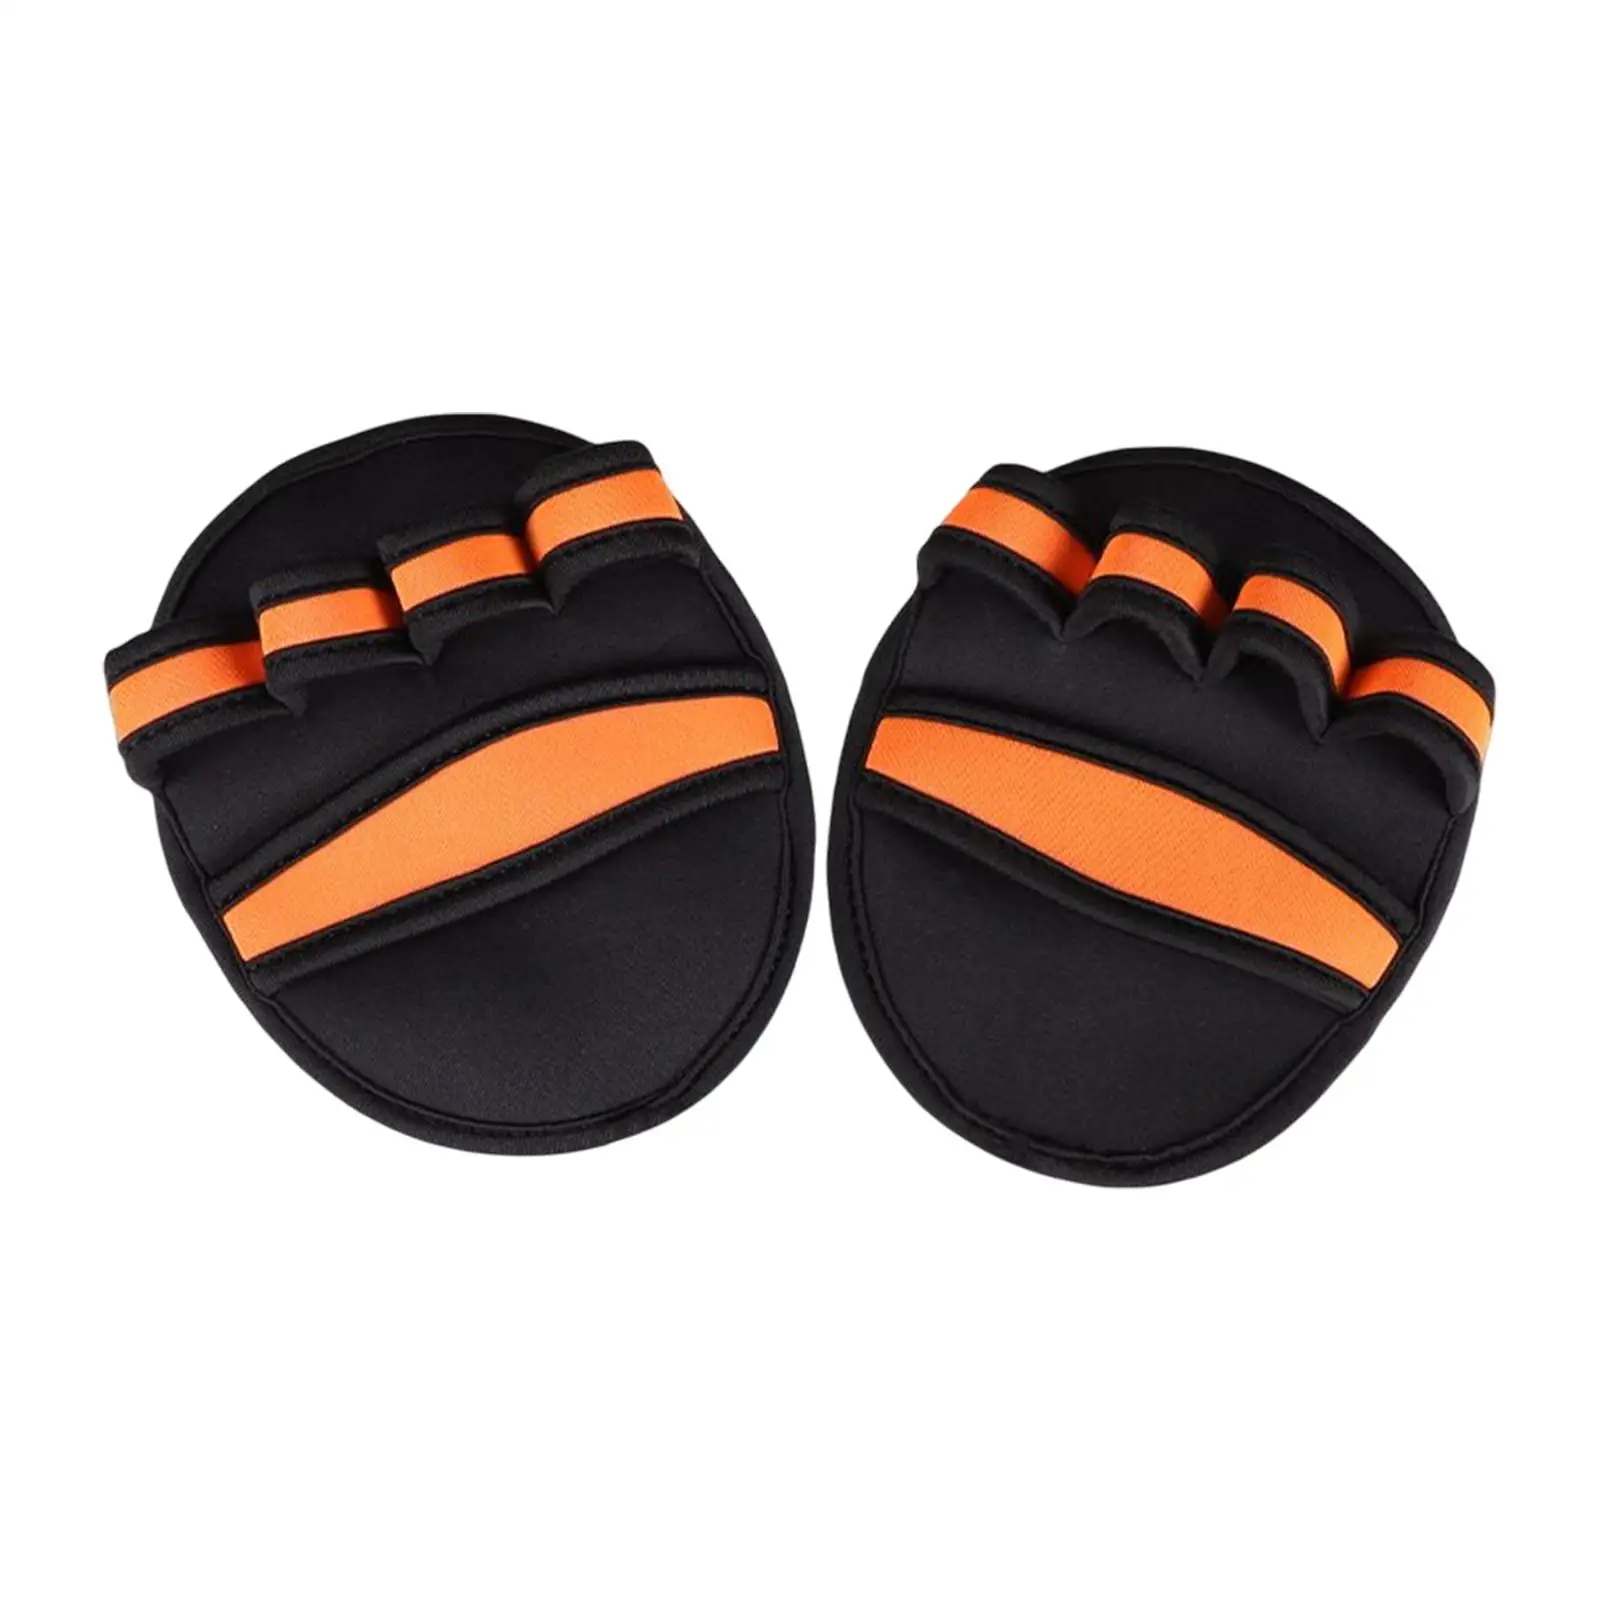 Gym Grip Pads Exercise Gloves Anti Slip Outdoor Sports for Weightlifting Push Ups